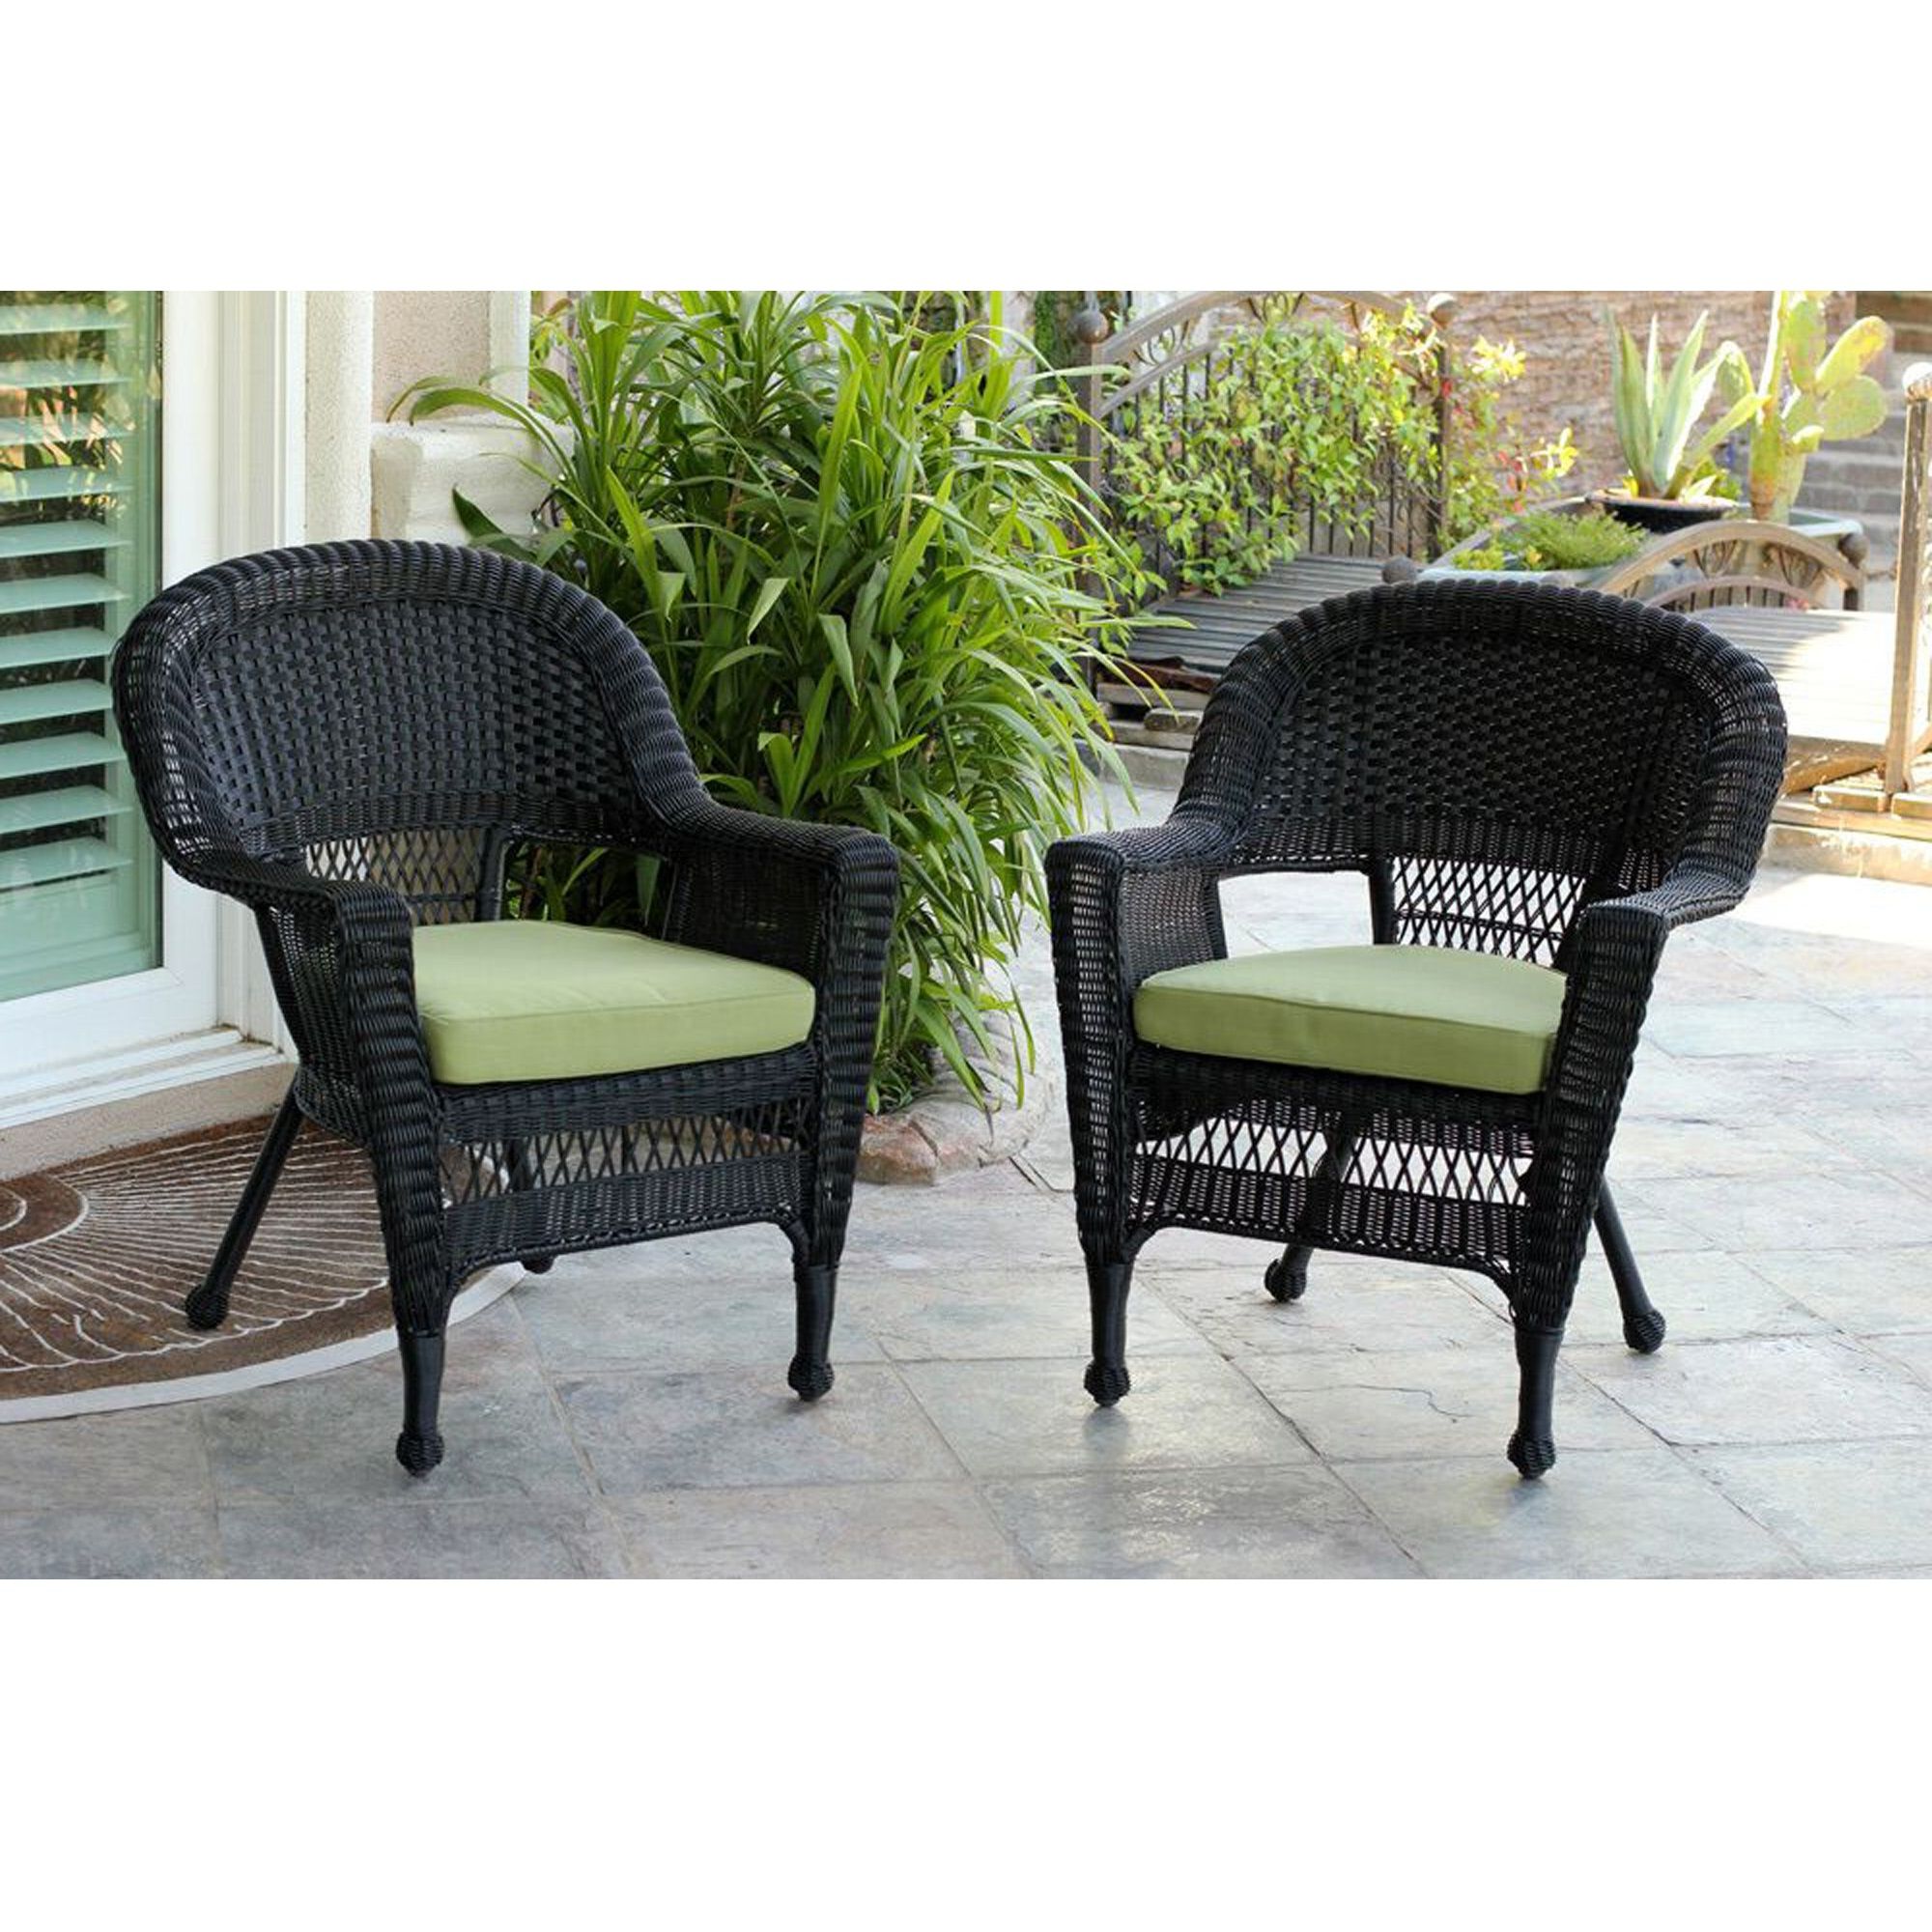 Best And Newest Rattan Wicker Outdoor Seating Sets Regarding Set Of 2 Black Resin Wicker Outdoor Patio Garden Chairs With Green (View 6 of 15)